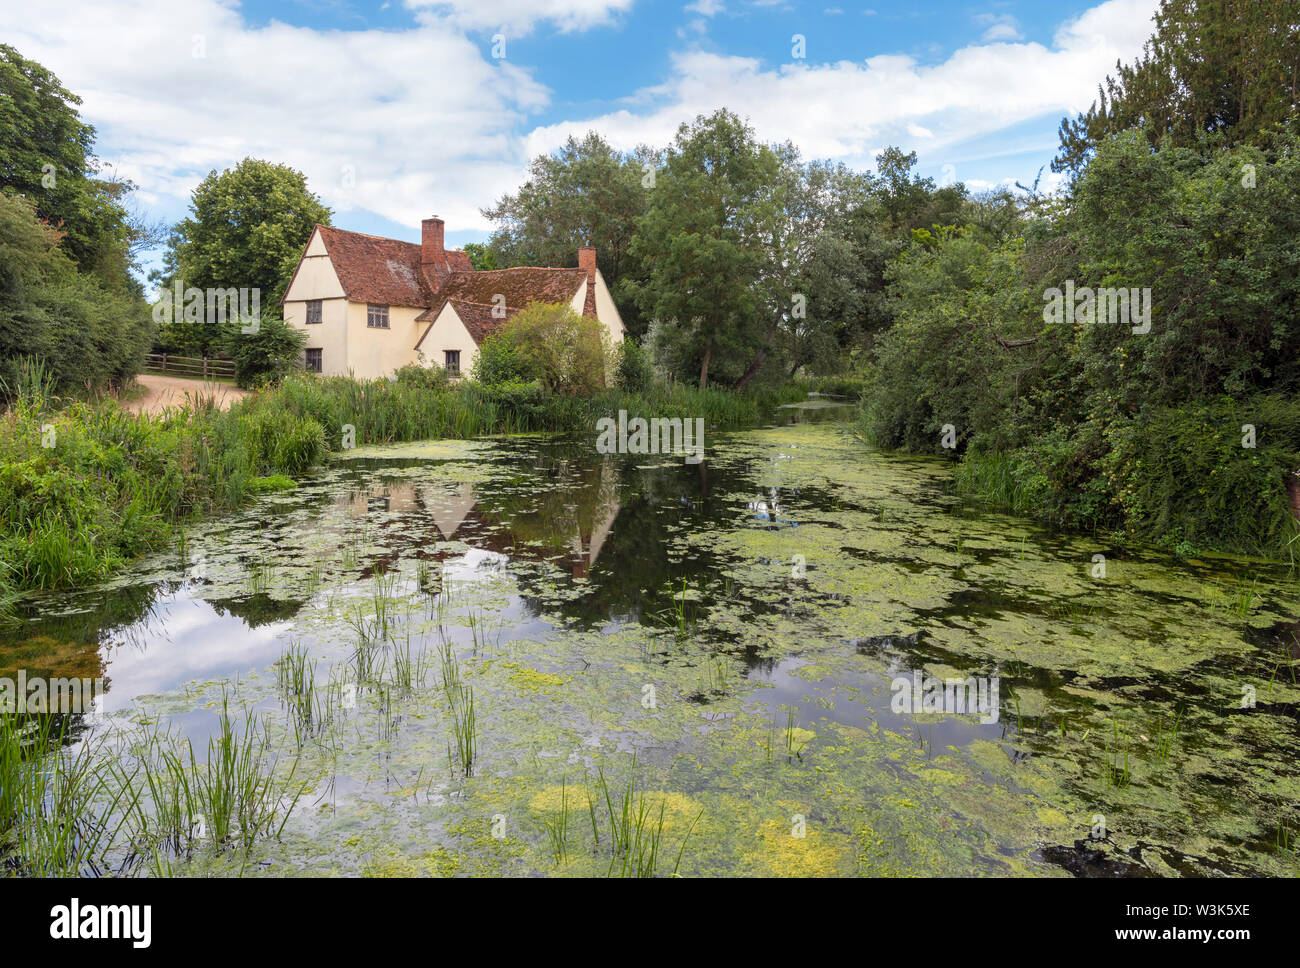 Willy Lott's Cottage sul fiume Stour al Mulino di Flatford, featured in Constable's Hay Wain, East Bergholt, Essex, Inghilterra, Regno Unito Foto Stock